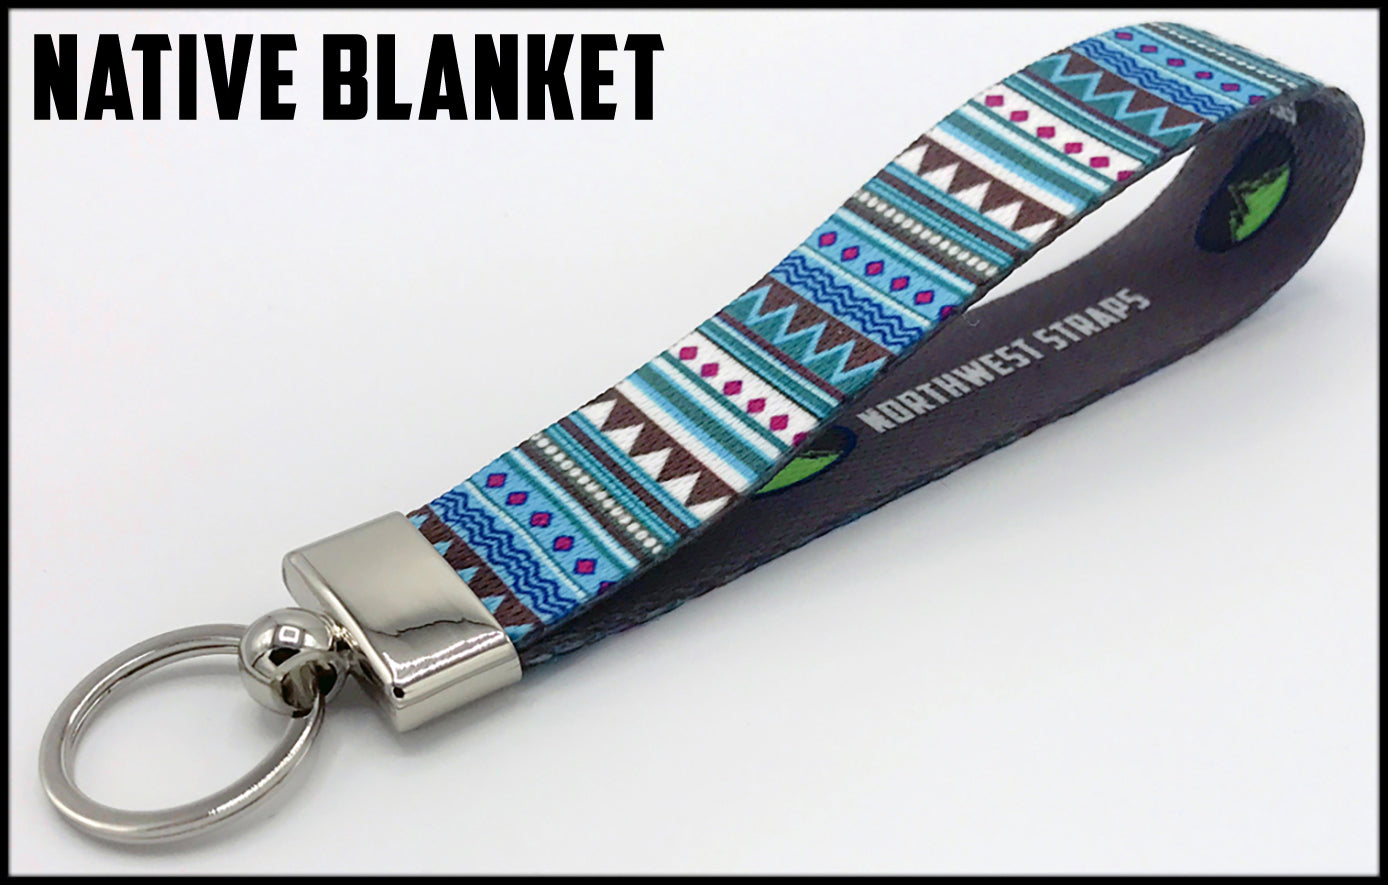 Native blanket blue brown purple and white. 1 inch custom picture quality polyester webbing keyfob. Design by Northwest Straps.